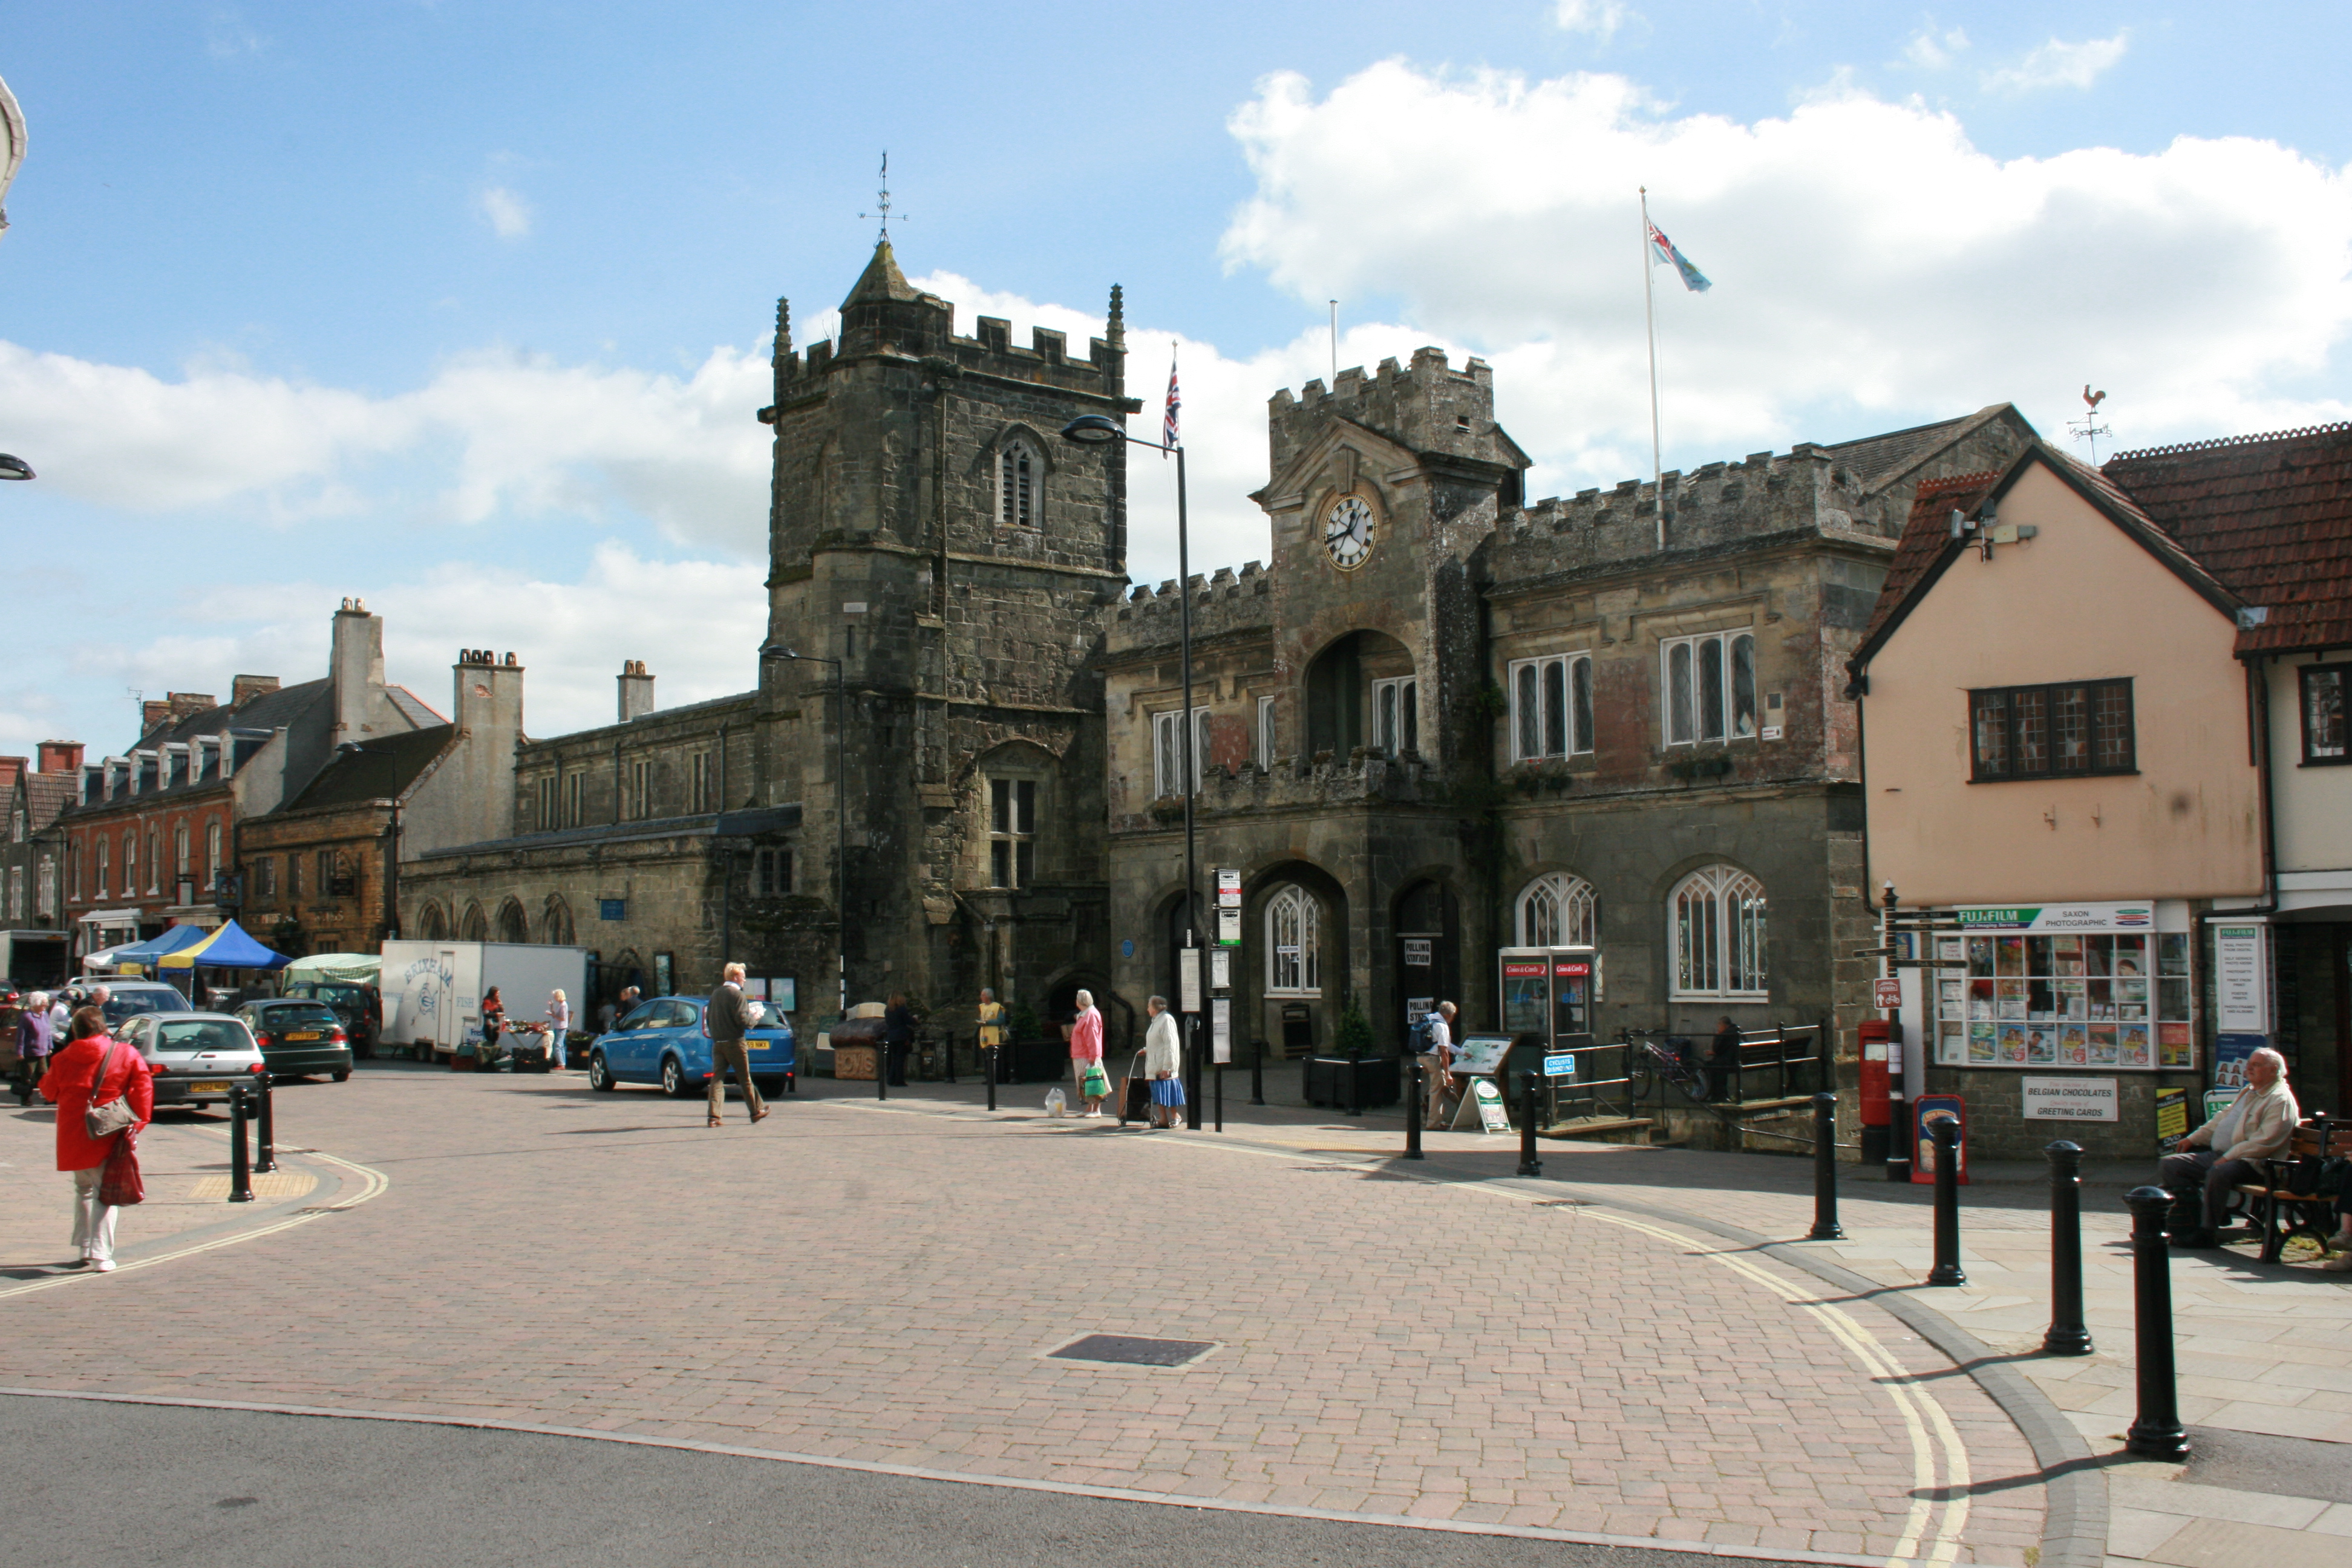 Shaftesbury town centre